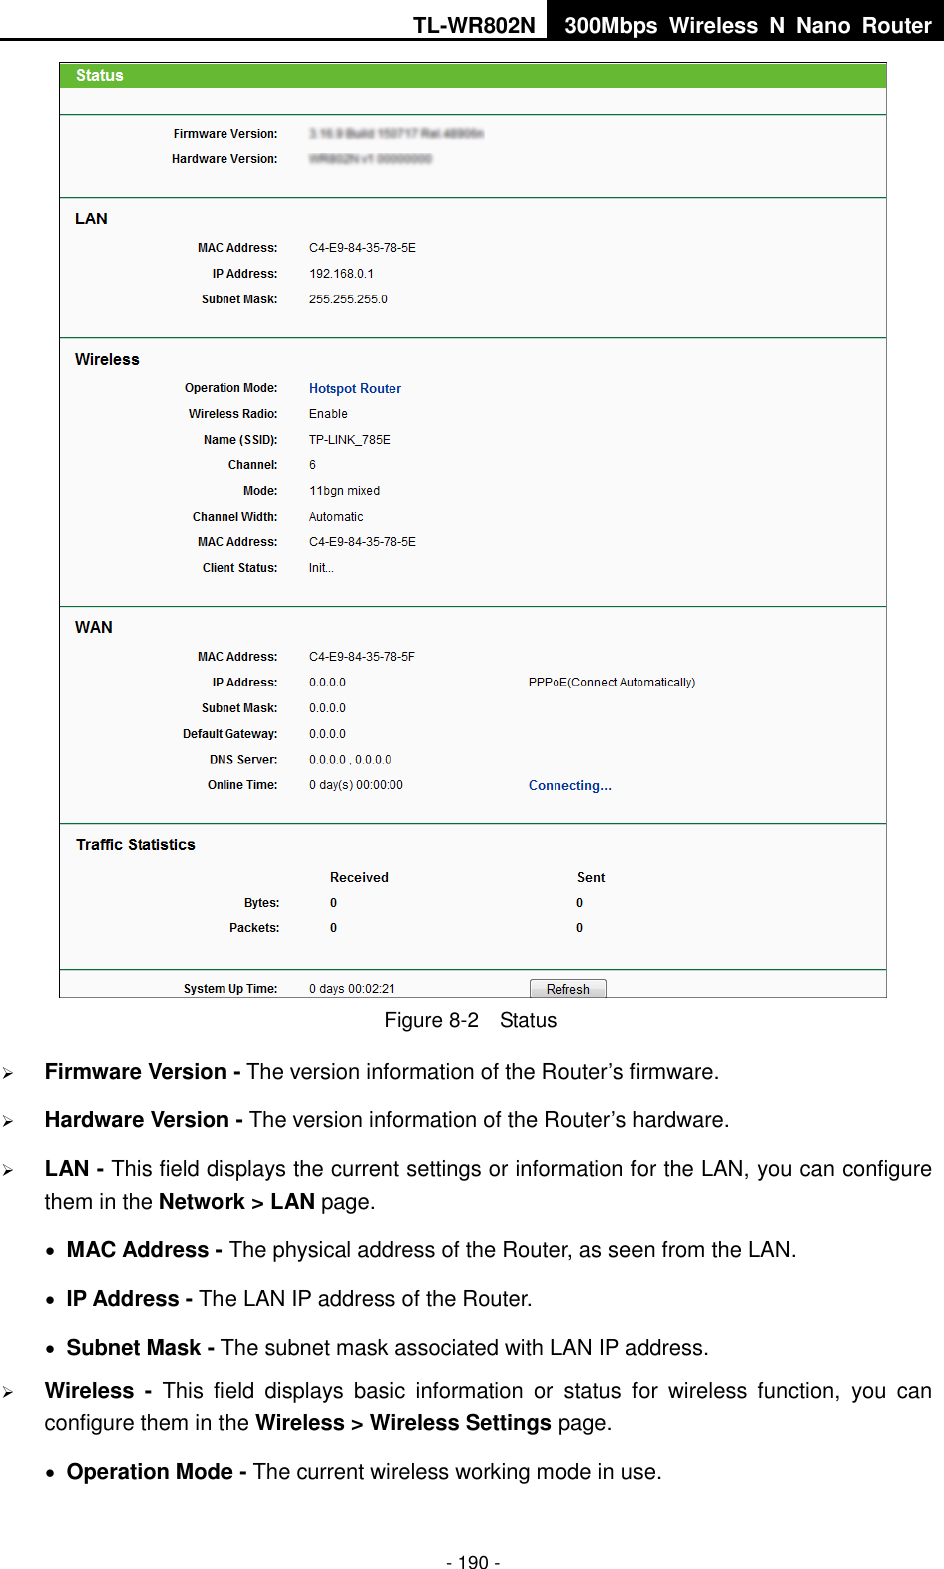 TL-WR802N 300Mbps  Wireless  N  Nano  Router  - 190 -  Figure 8-2  Status  Firmware Version - The version information of the Router’s firmware.  Hardware Version - The version information of the Router’s hardware.  LAN - This field displays the current settings or information for the LAN, you can configure them in the Network &gt; LAN page.    MAC Address - The physical address of the Router, as seen from the LAN.  IP Address - The LAN IP address of the Router.  Subnet Mask - The subnet mask associated with LAN IP address.  Wireless -  This  field  displays  basic  information  or  status  for  wireless  function,  you  can configure them in the Wireless &gt; Wireless Settings page.    Operation Mode - The current wireless working mode in use. 